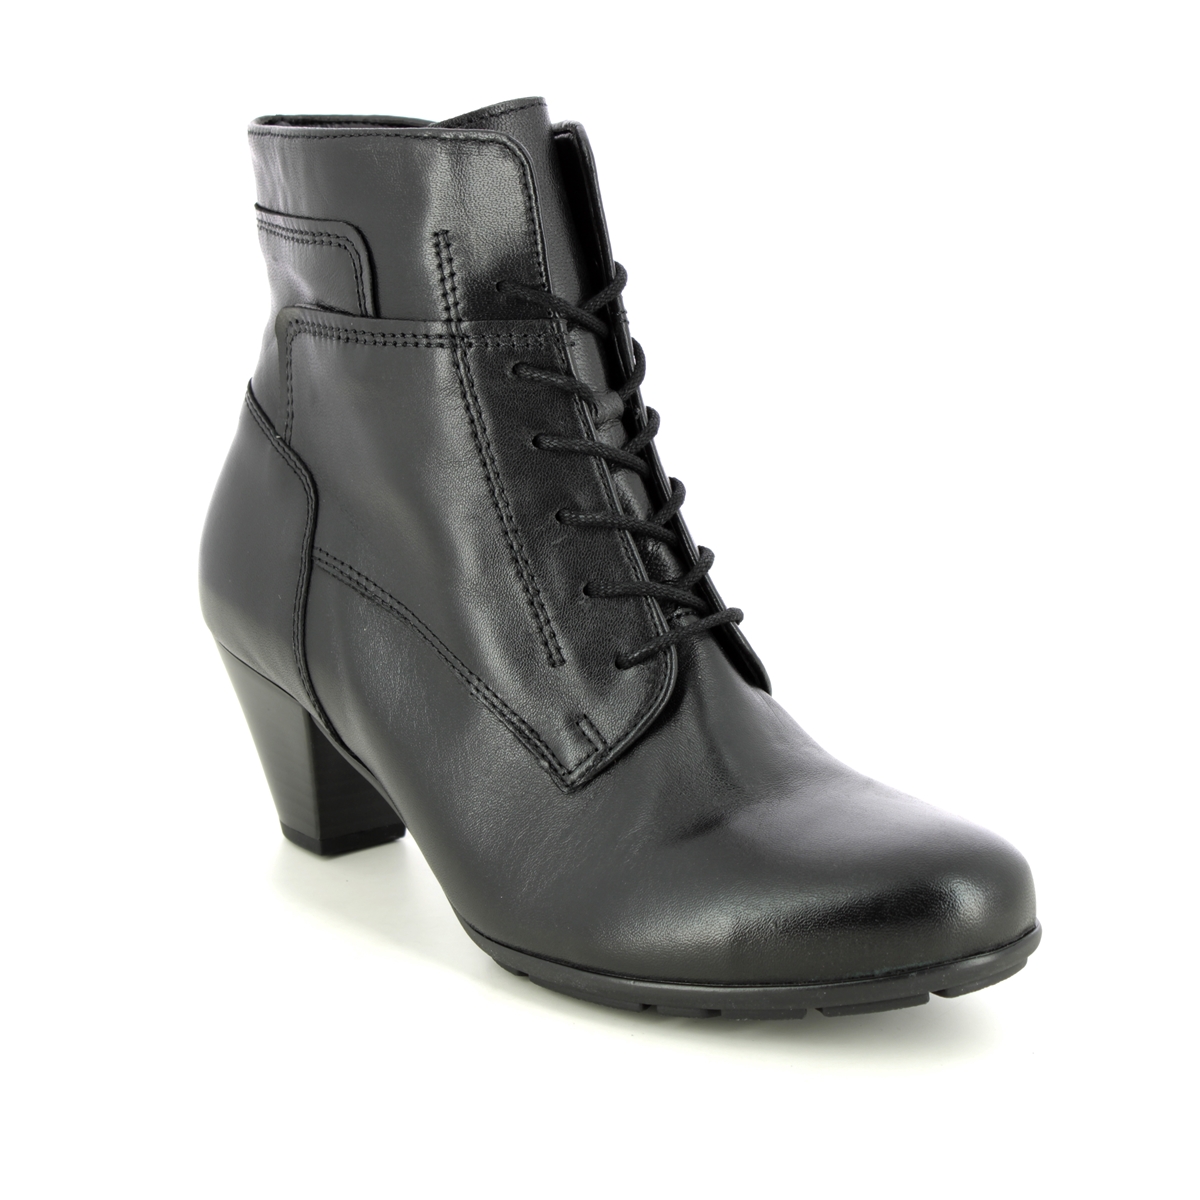 Gabor Black leather Heeled Boots